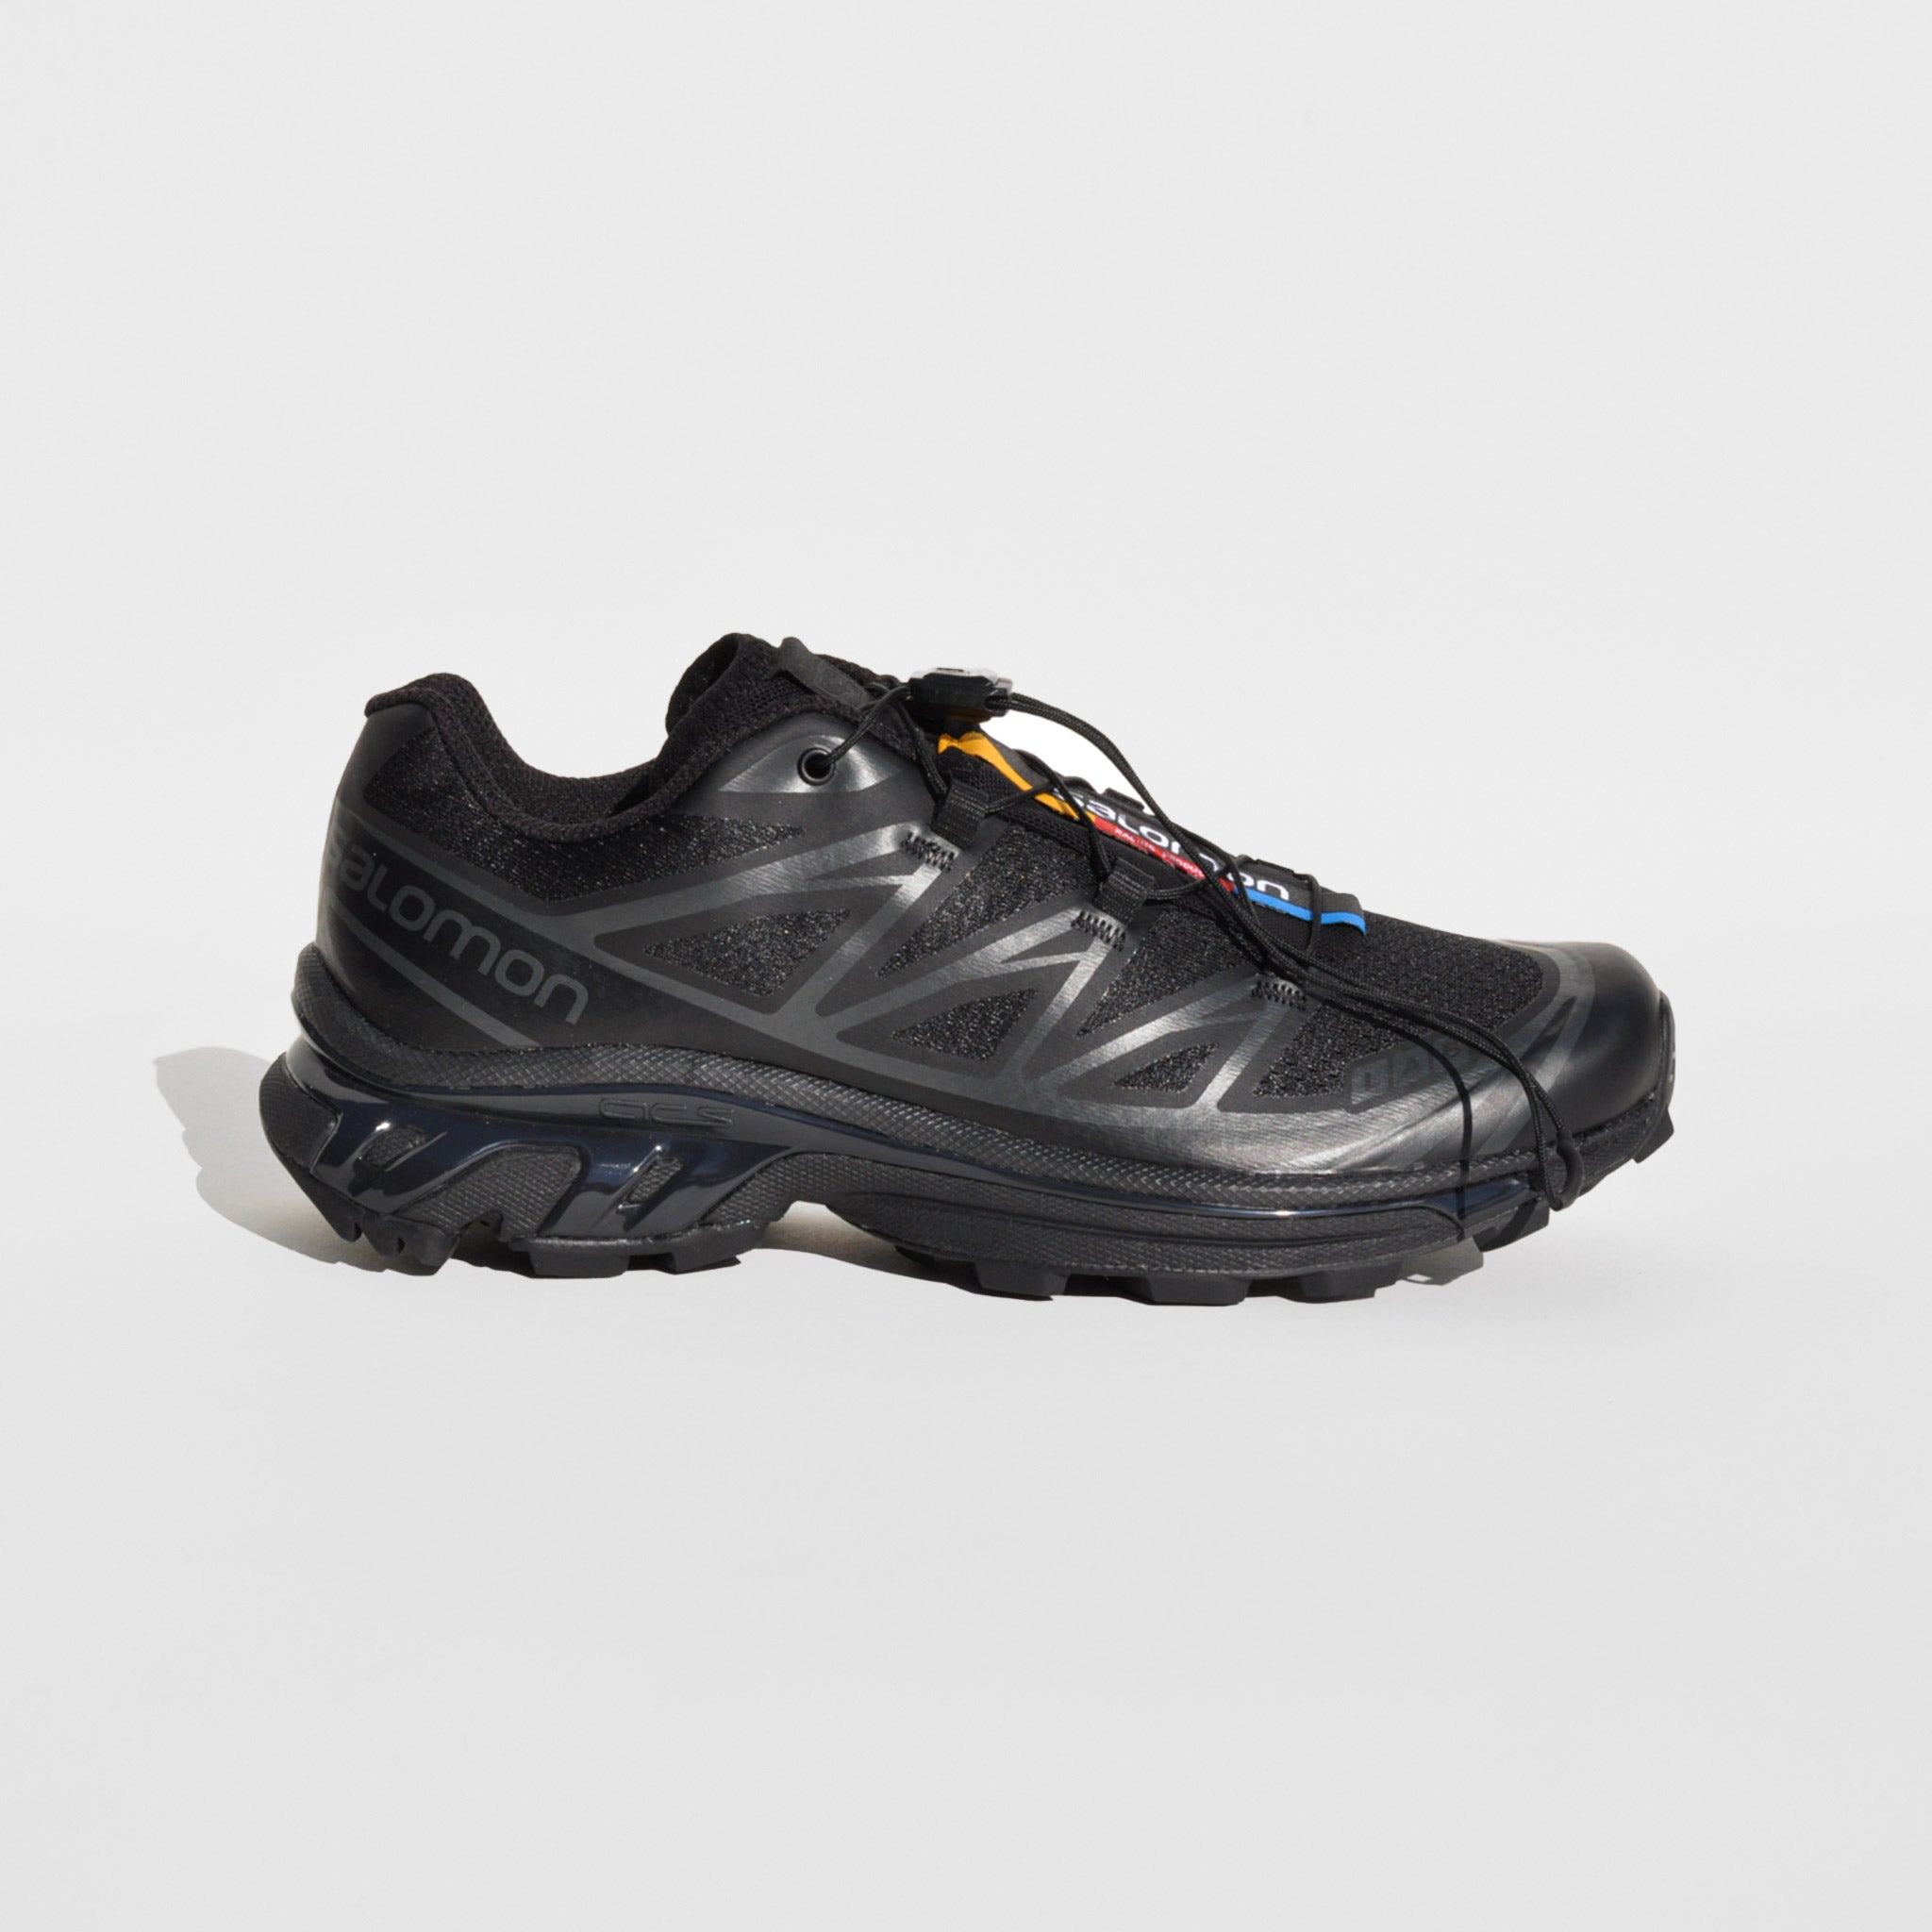 Salomon Sportstyle - XT-6 - available at LCD